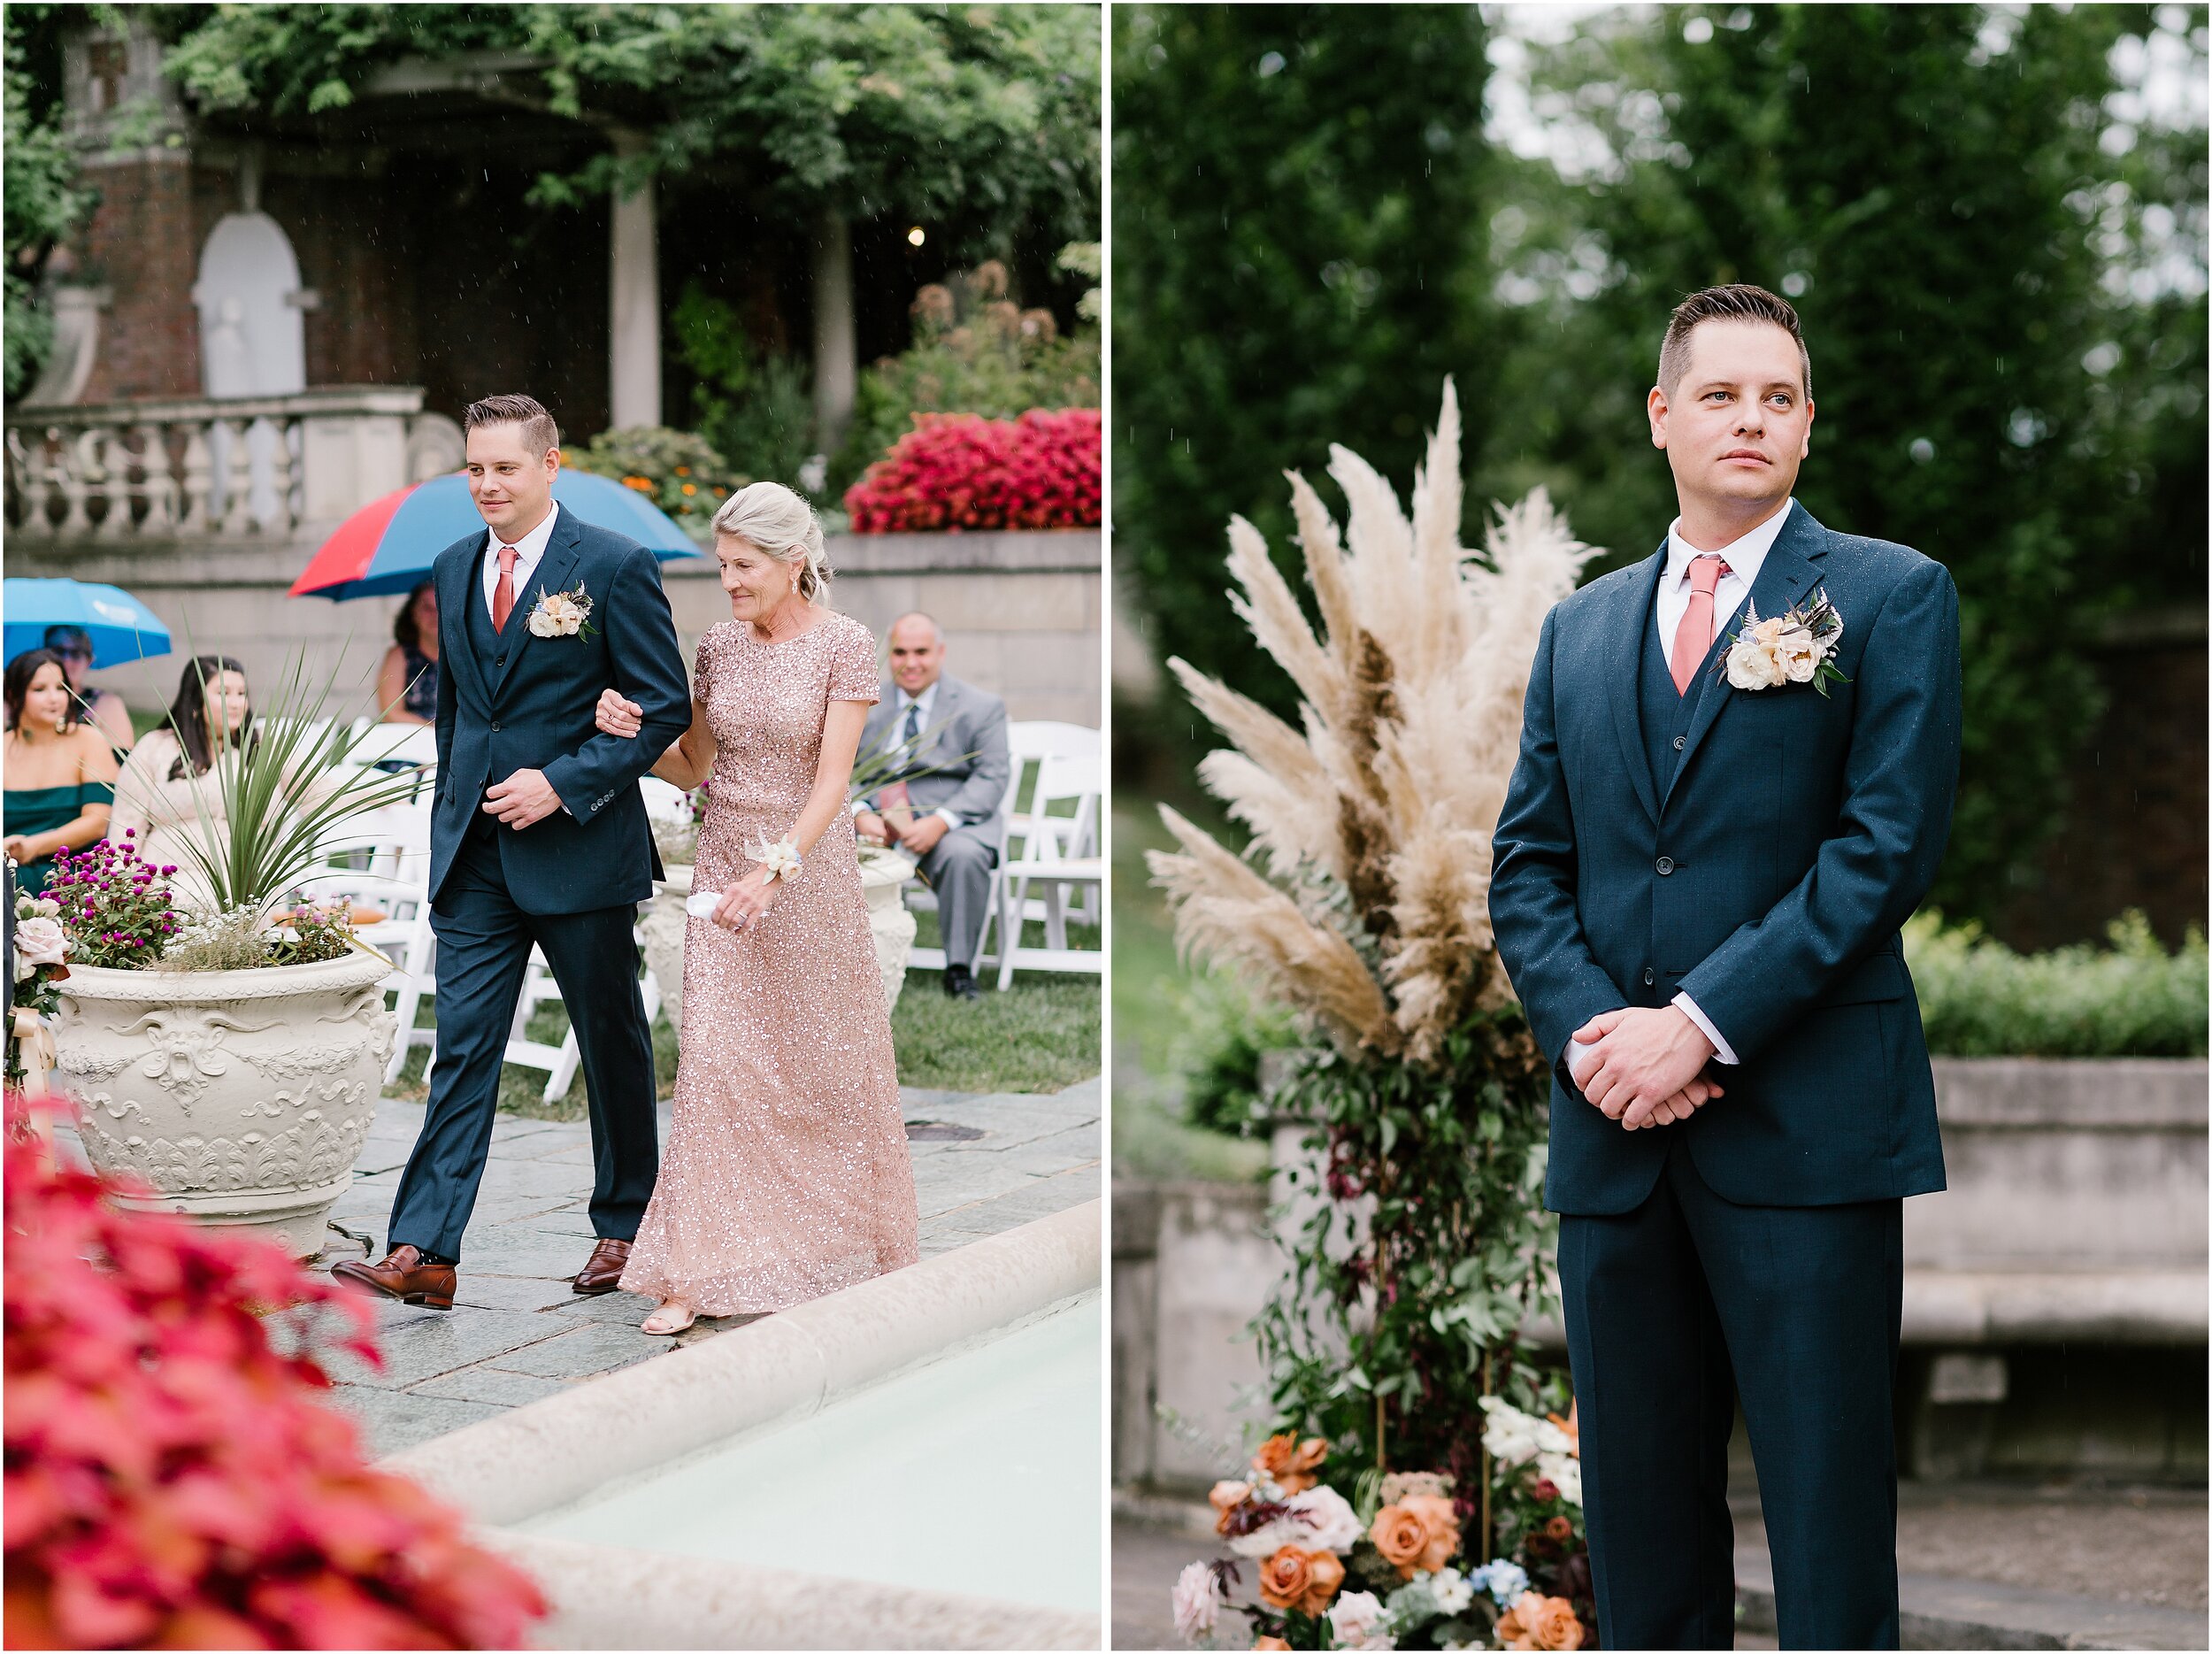 Rebecca Shehorn Photography Colleen and Kyle Inn at Irwin Gardens Wedding-459_The Commons Columbus Inn at Irwin Garden Indianapolis Wedding Photographer.jpg